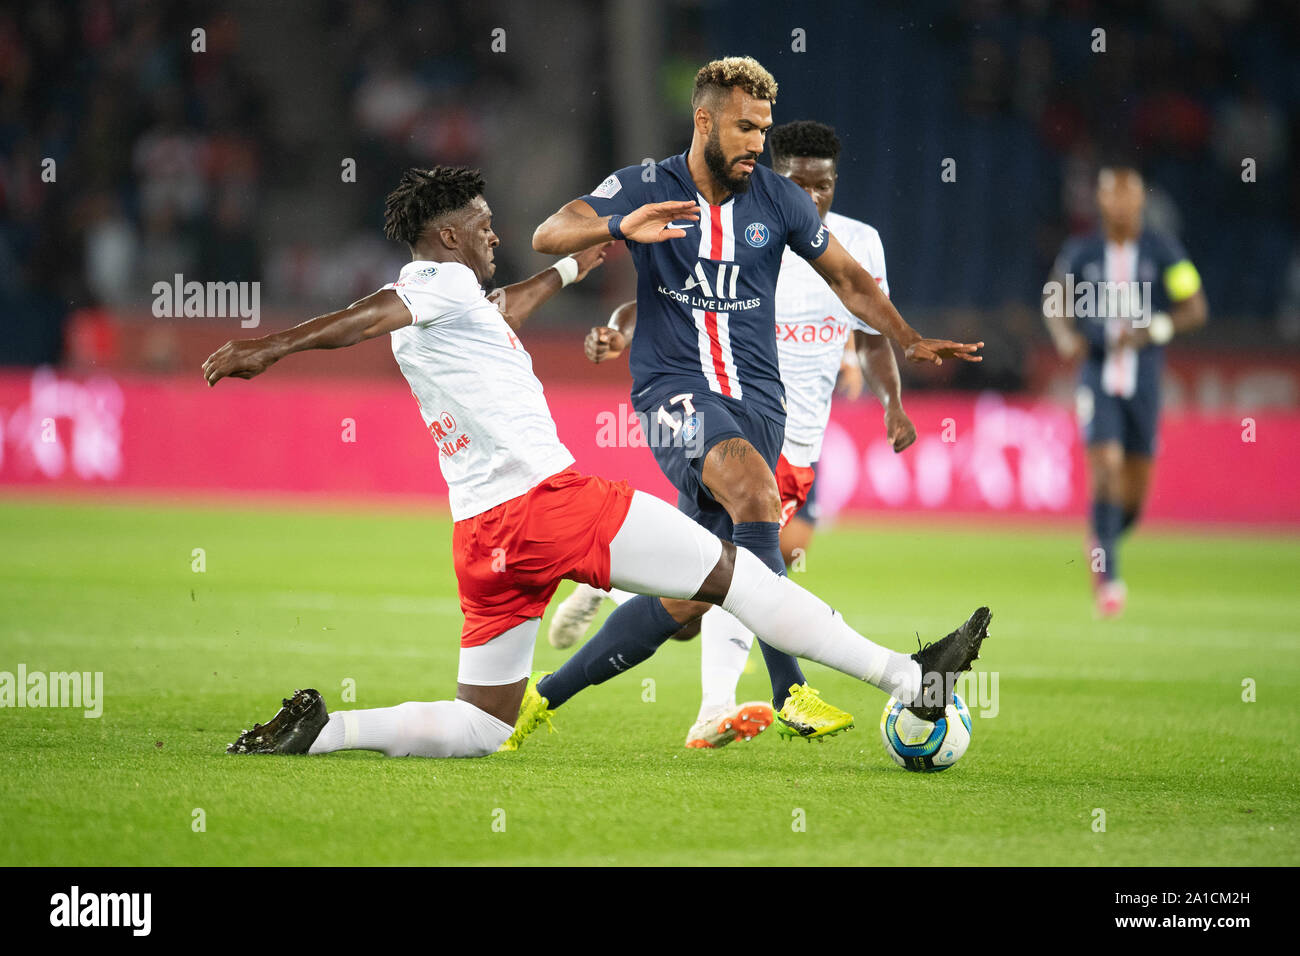 Paris. 25th Sep, 2019. Eric Maxim Choupo-Moting (C) of Paris Saint-Germain competes with Axel Disasi of Reims during their 2019-2020 season French Ligue 1 match in Paris, France on Sept. 25, 2019. Credit: Jack Chan/Xinhua/Alamy Live News Stock Photo